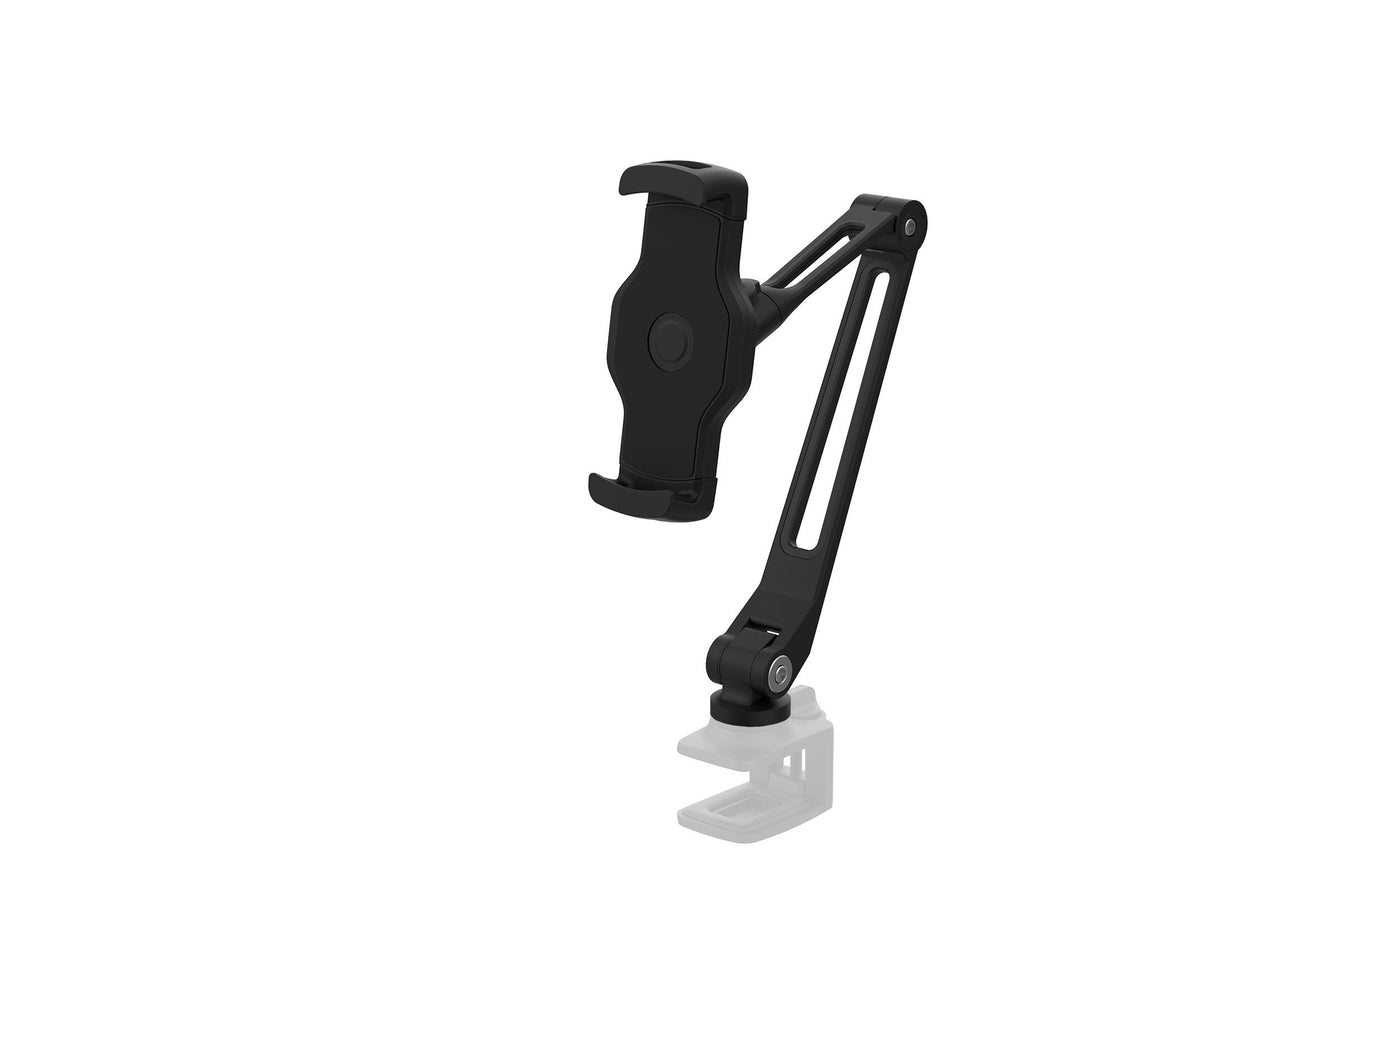 iRing Easy Lock Mount - Arm and Universal phone holder - Adjustable arm - Strong clamp - Rotatable - For Smartphone and Tablet